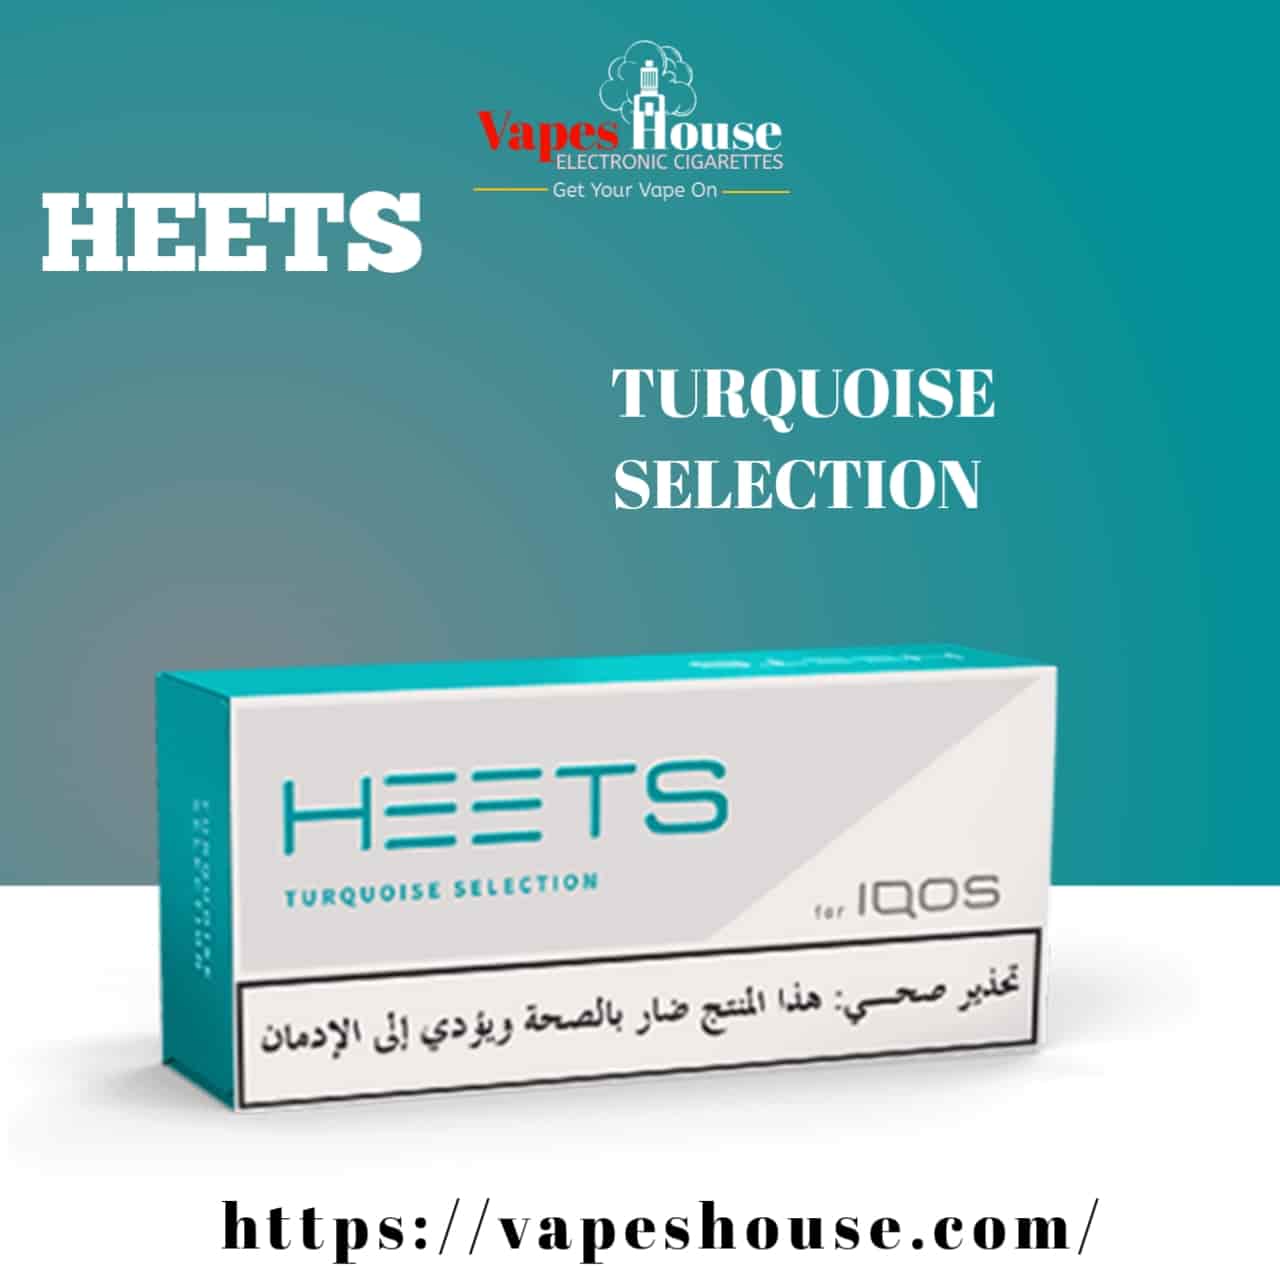 Best Heets - Turquoise Selection